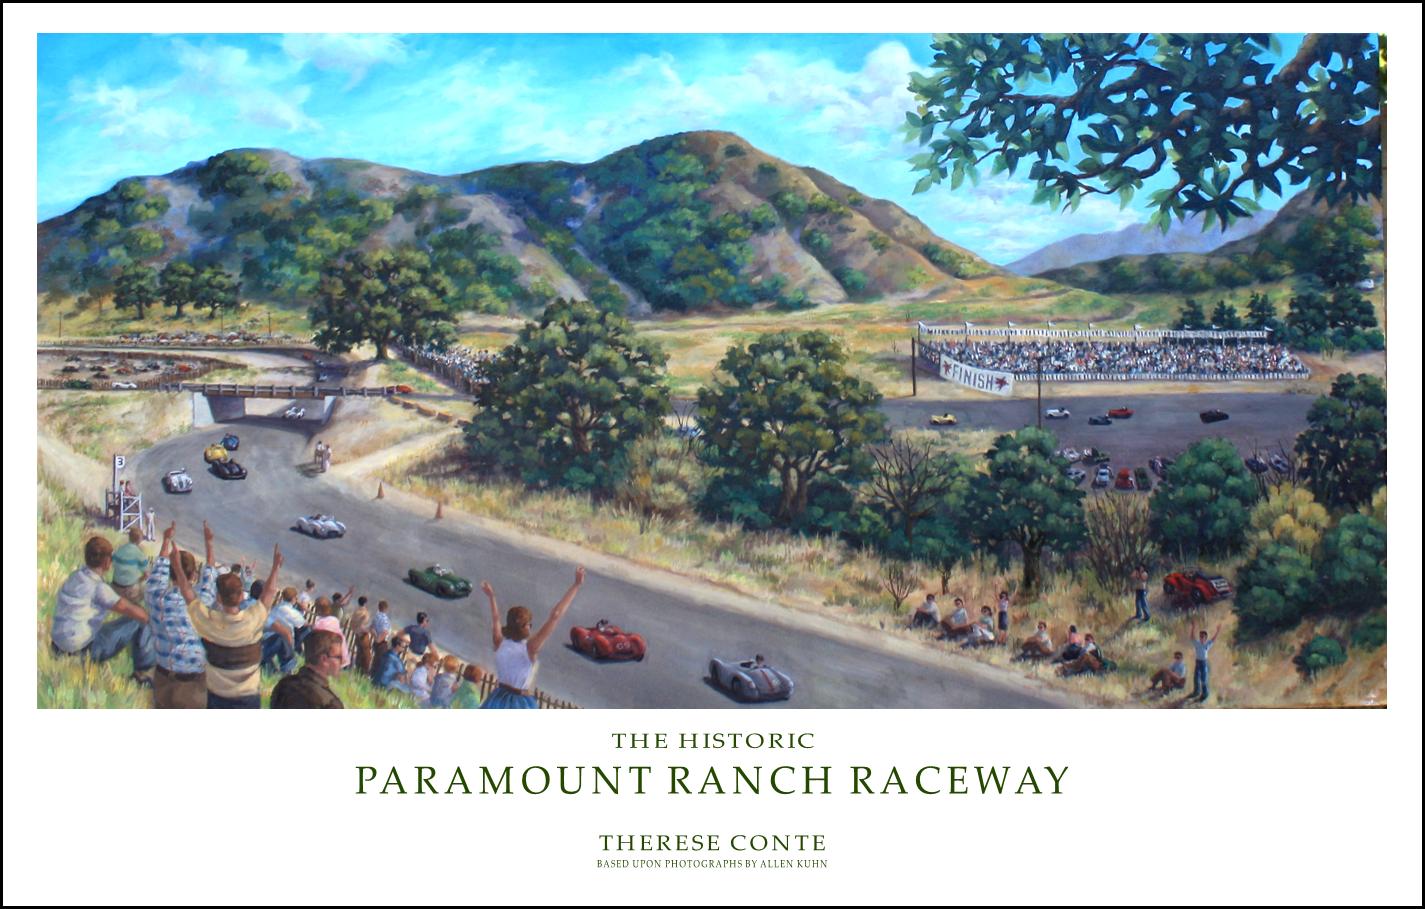 Painting of Paramount Ranch Raceway